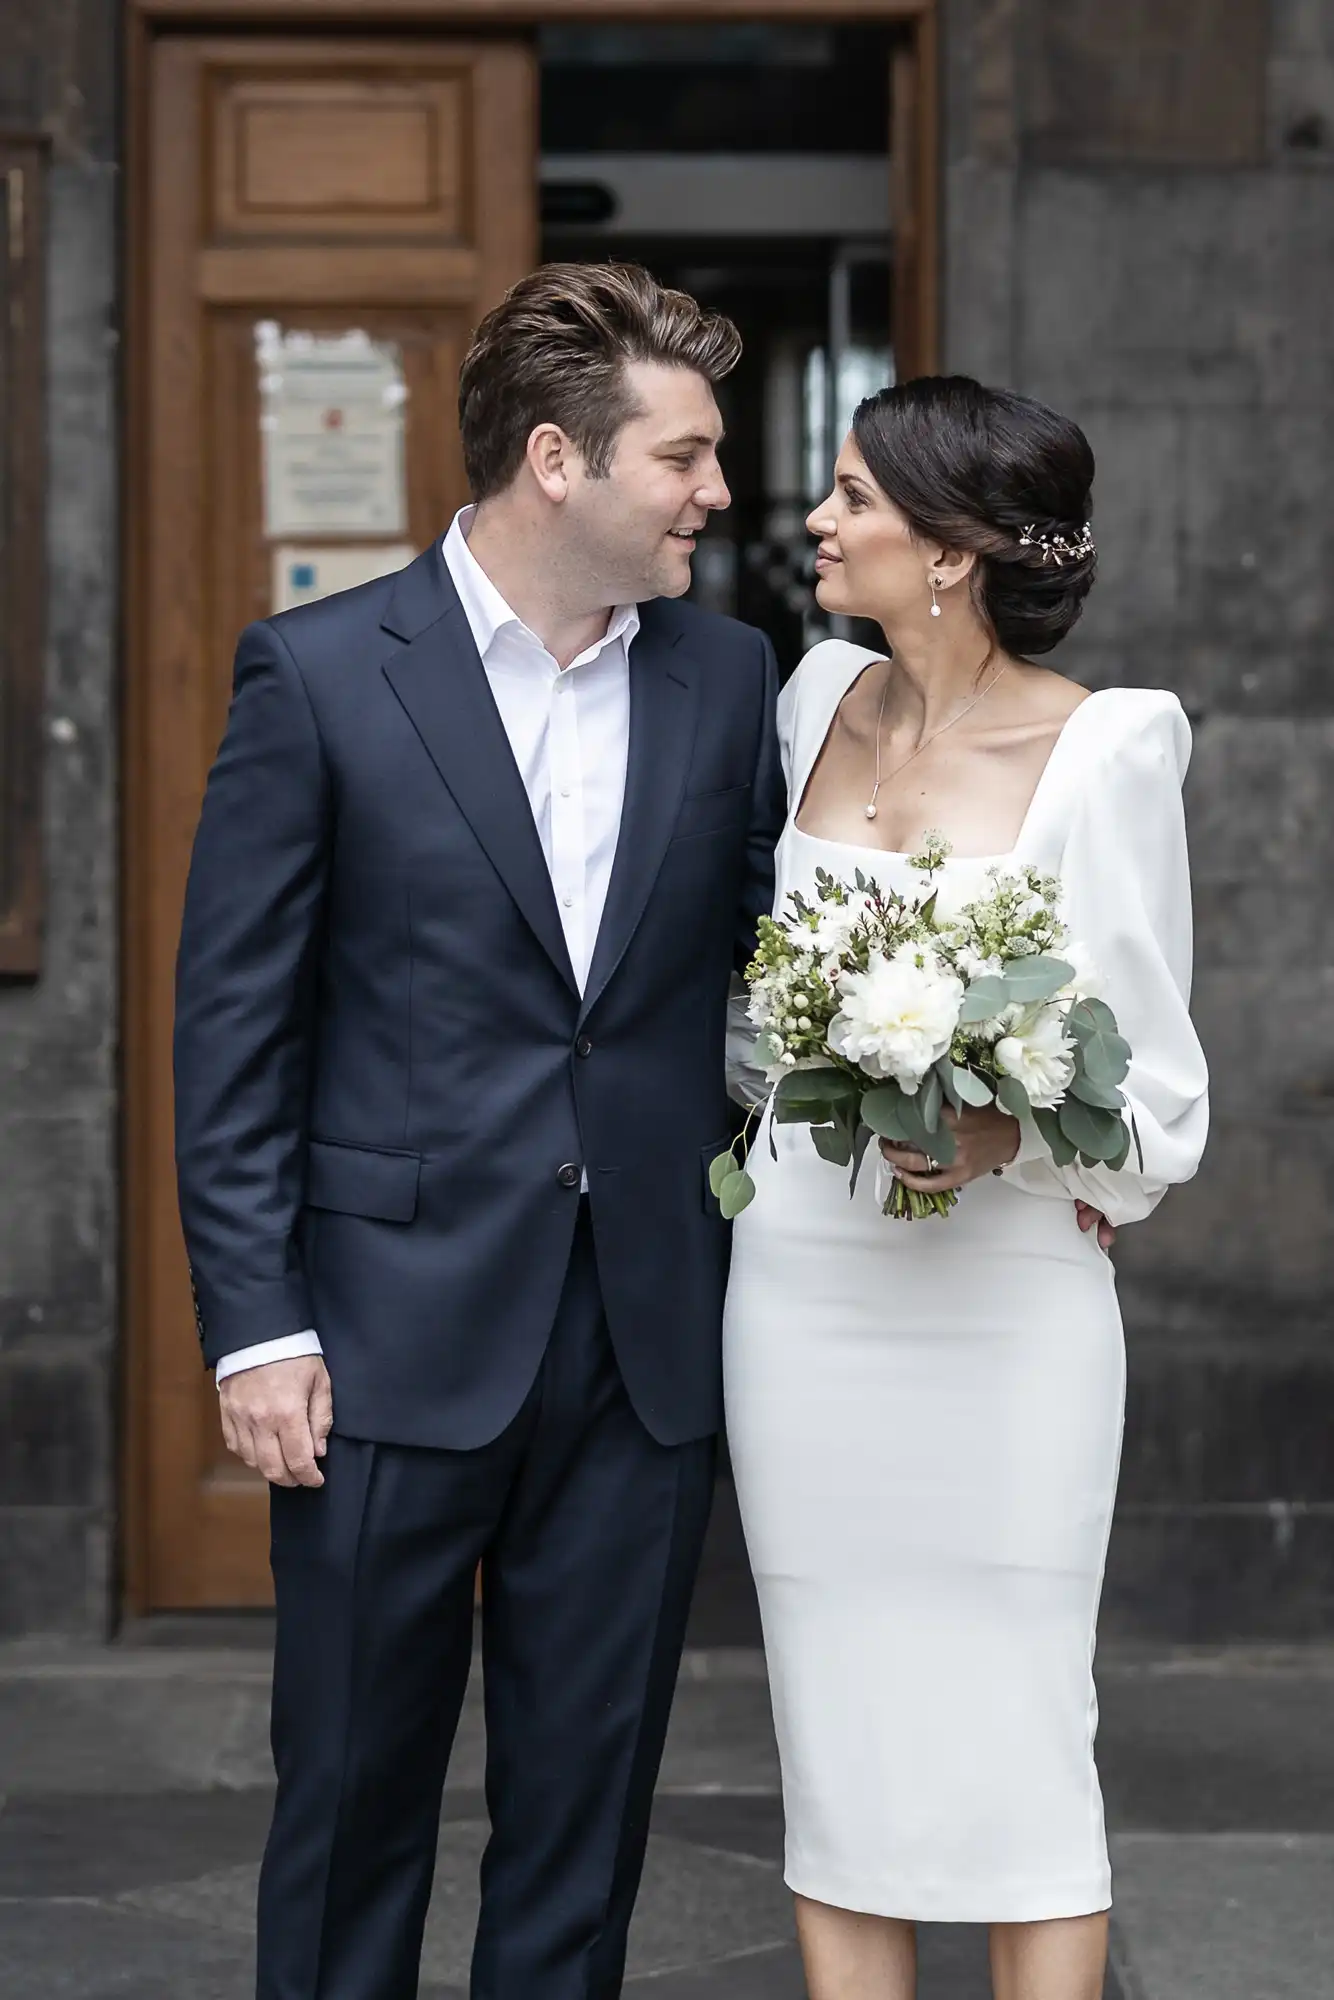 A bride in a white dress with a bouquet and a groom in a navy suit smiling at each other in front of a building with a wooden door.